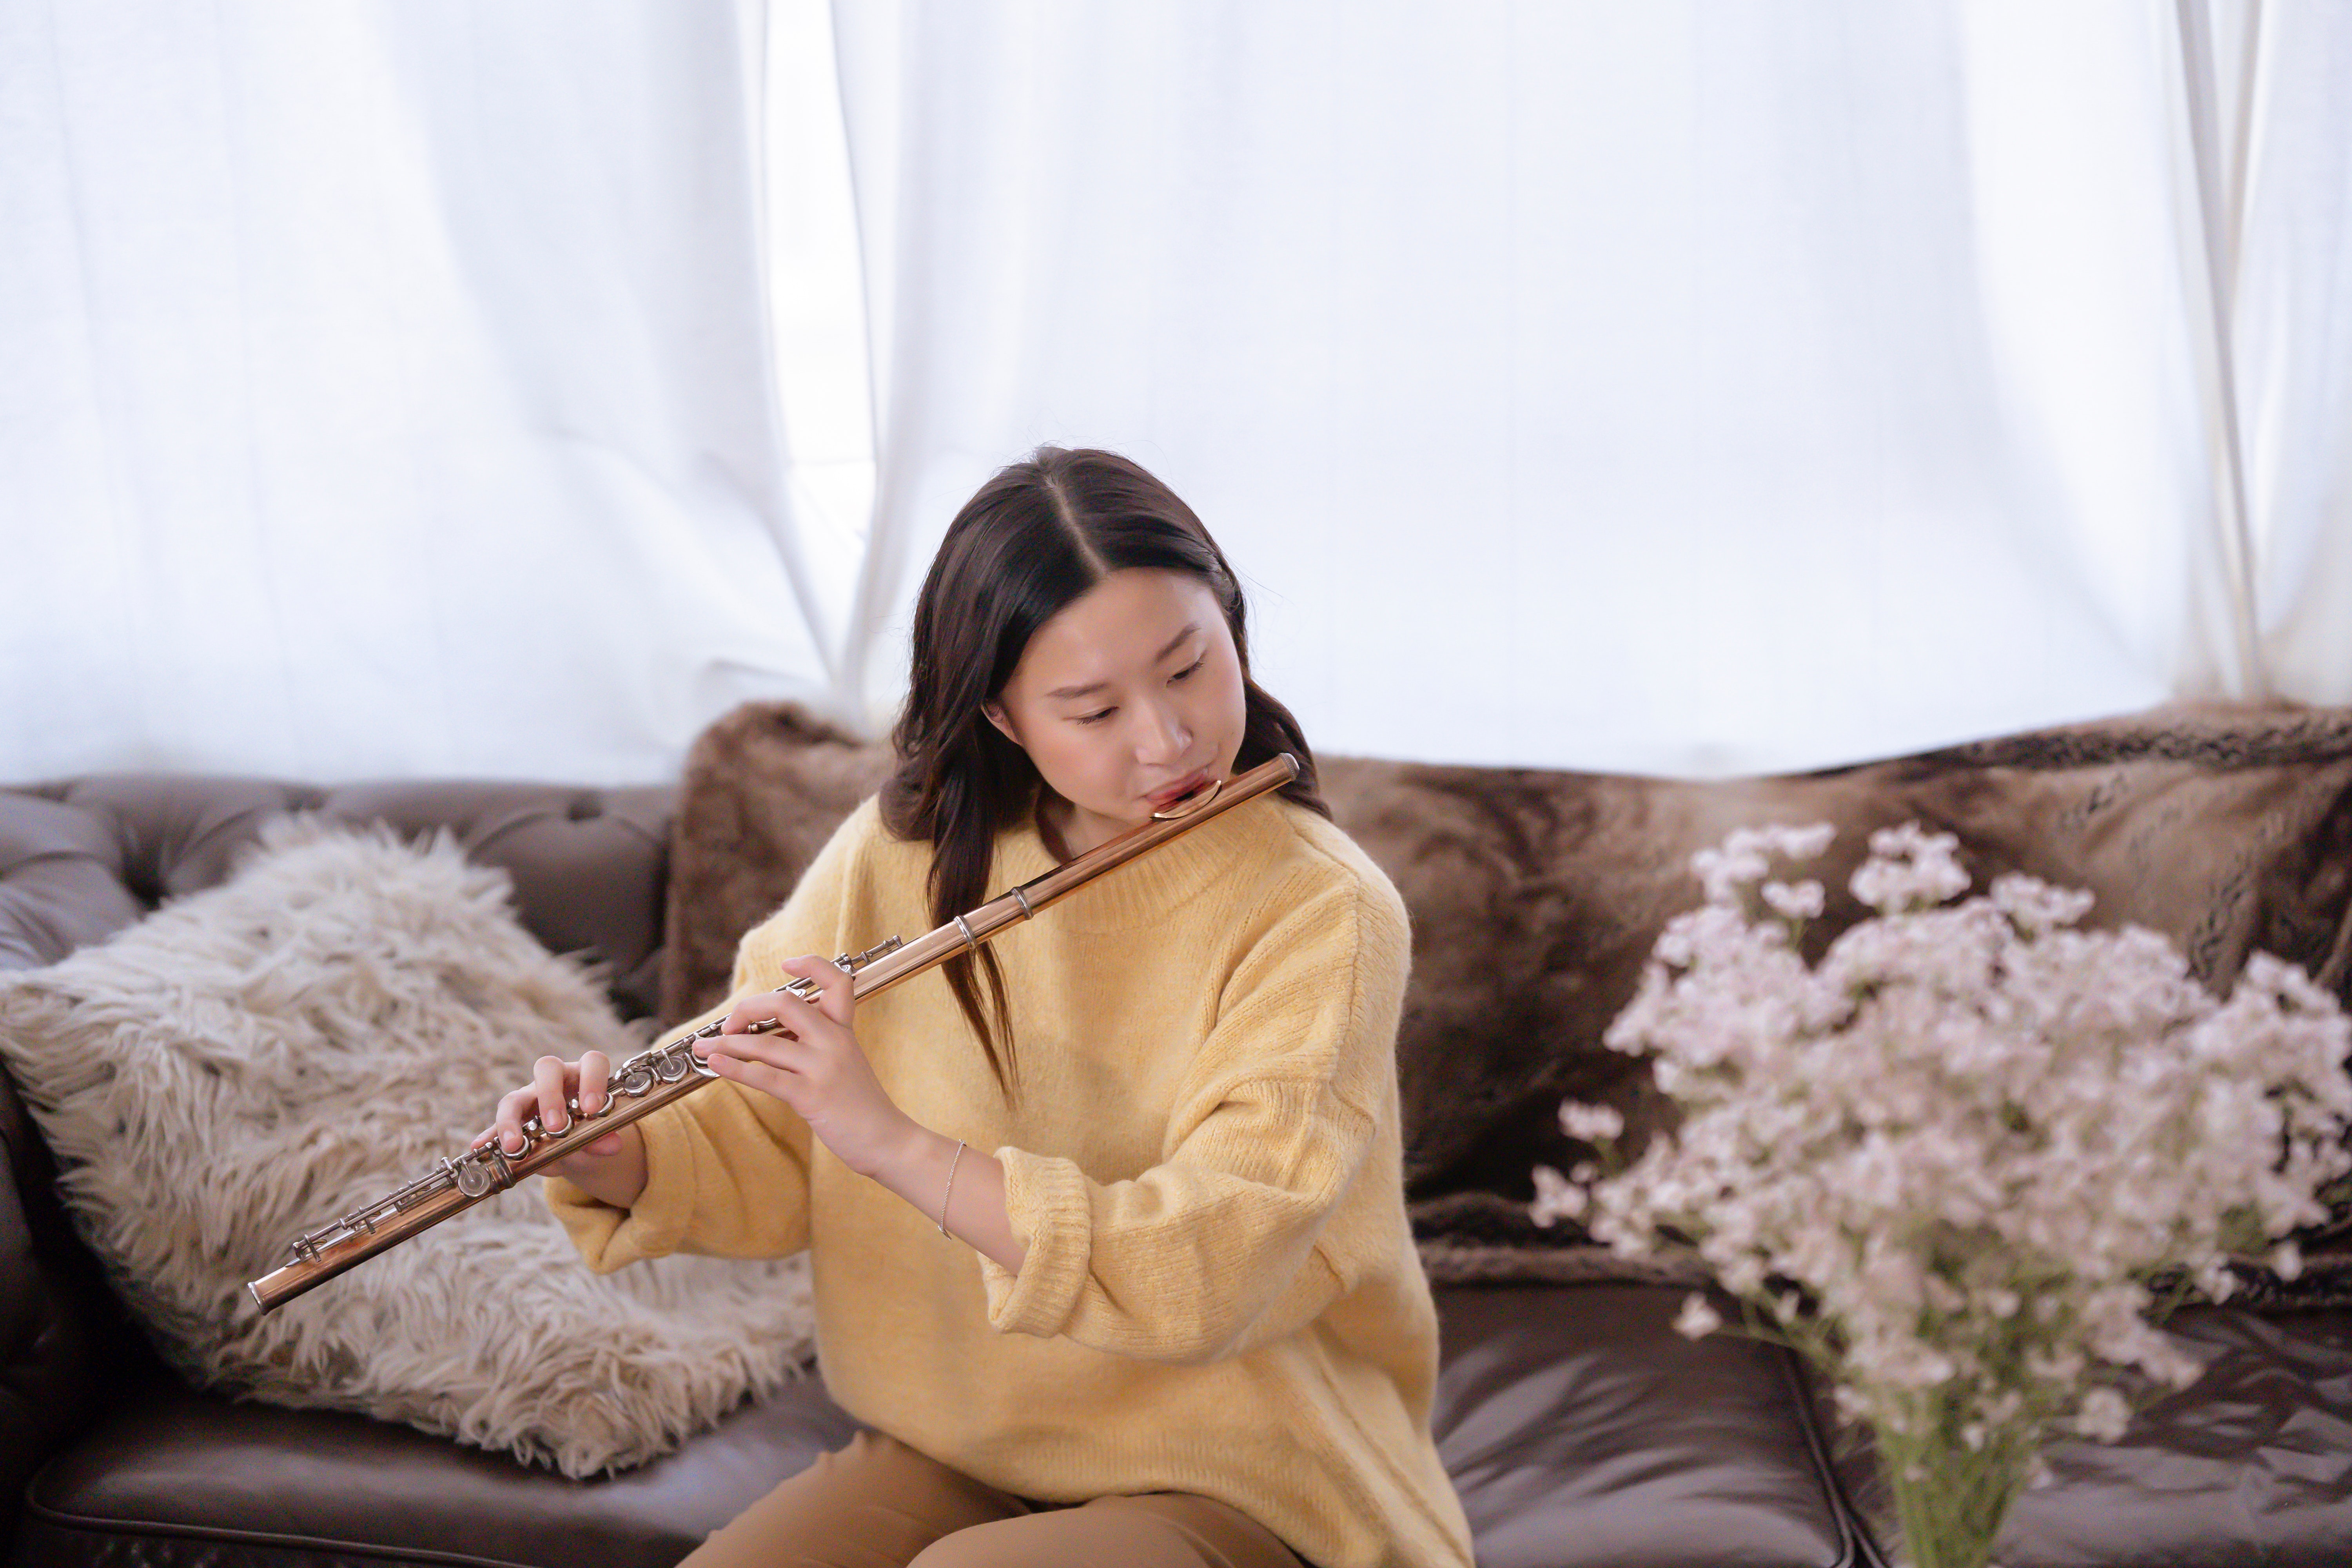 gradation of tone - young girl playing the flute